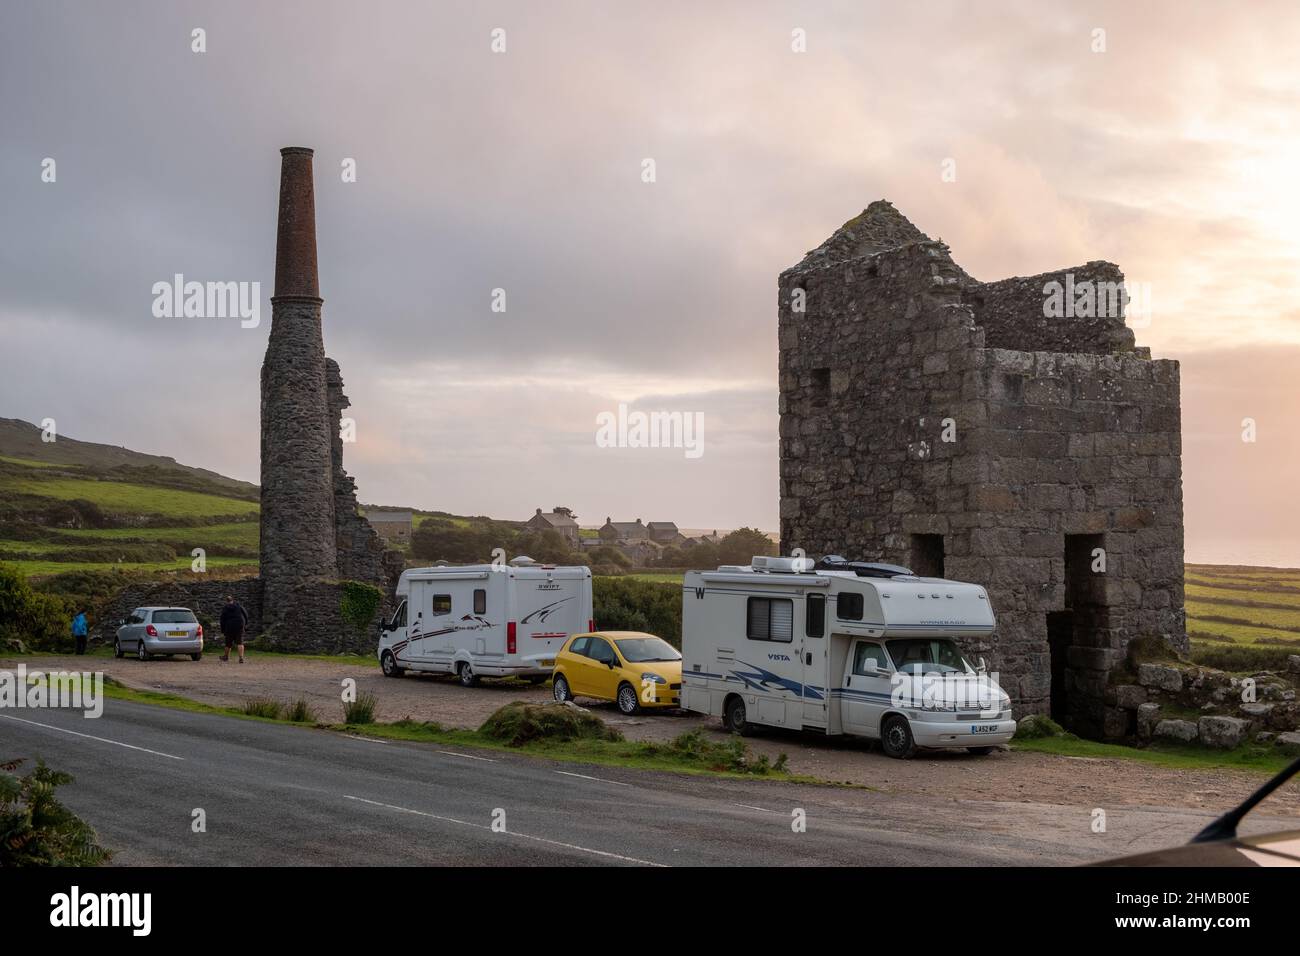 August 2018: Ruins of tin mining Pumping Engine House at Wheal Coates, St Agnes, Cornwall, UK Stock Photo